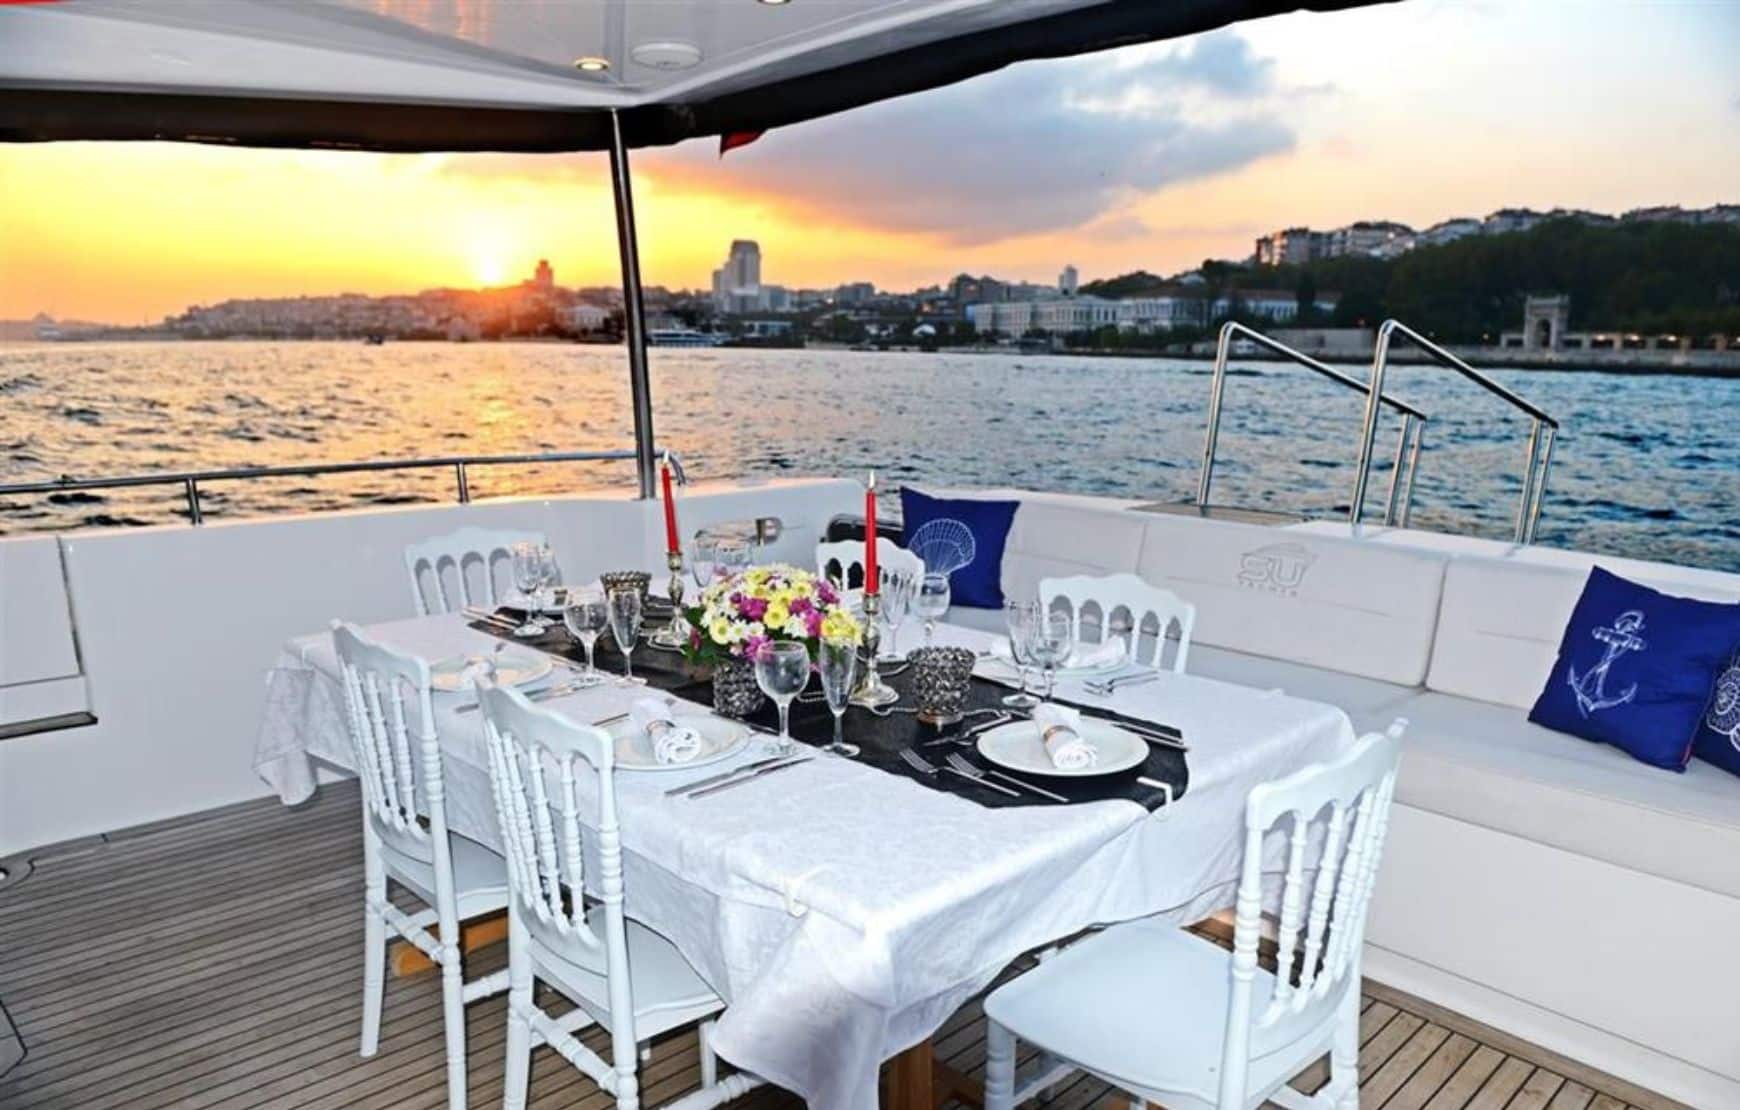 Special event in a private yacht in Bosphorus